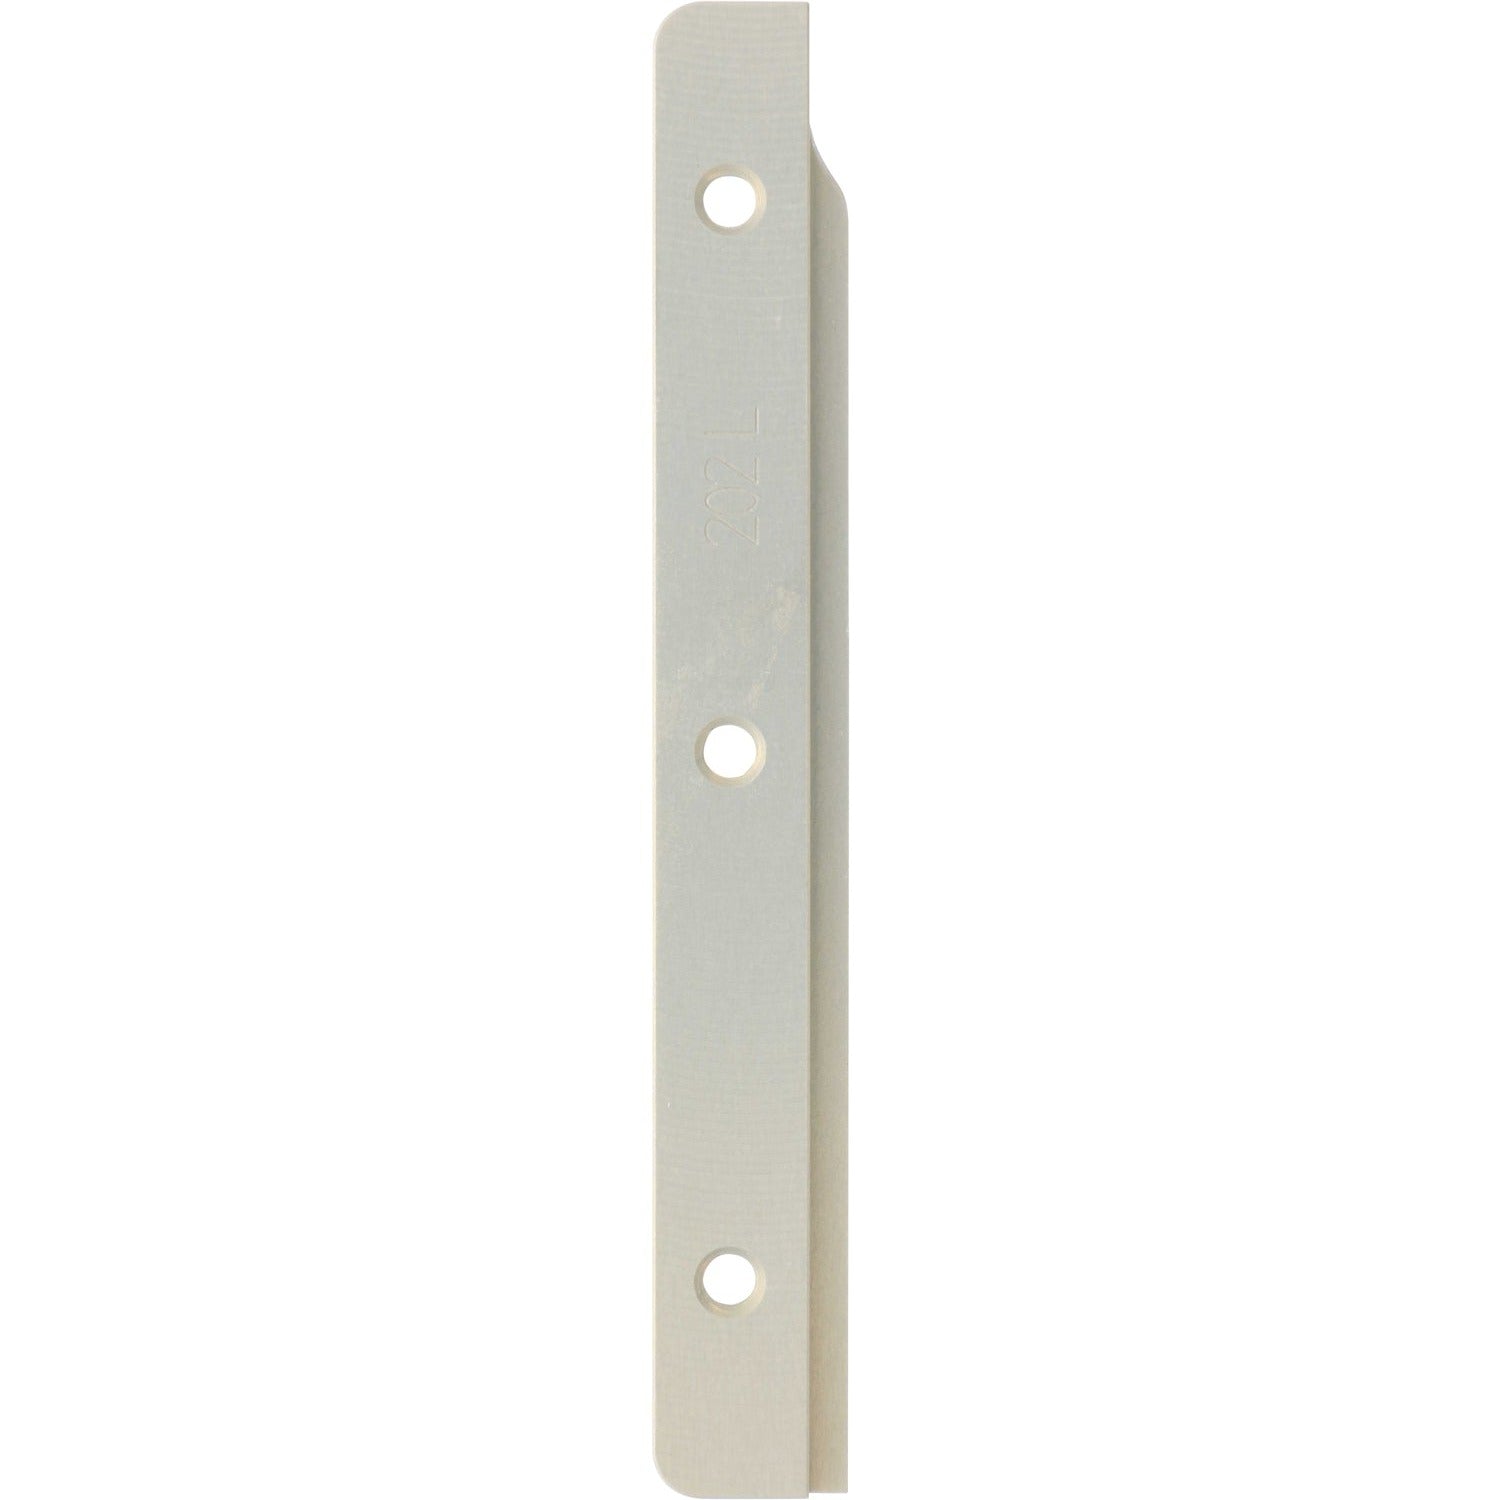 Machined blade like part made of hard anodized aluminum on white background. The part has three threaded holes and 202L machined onto it's surface. 